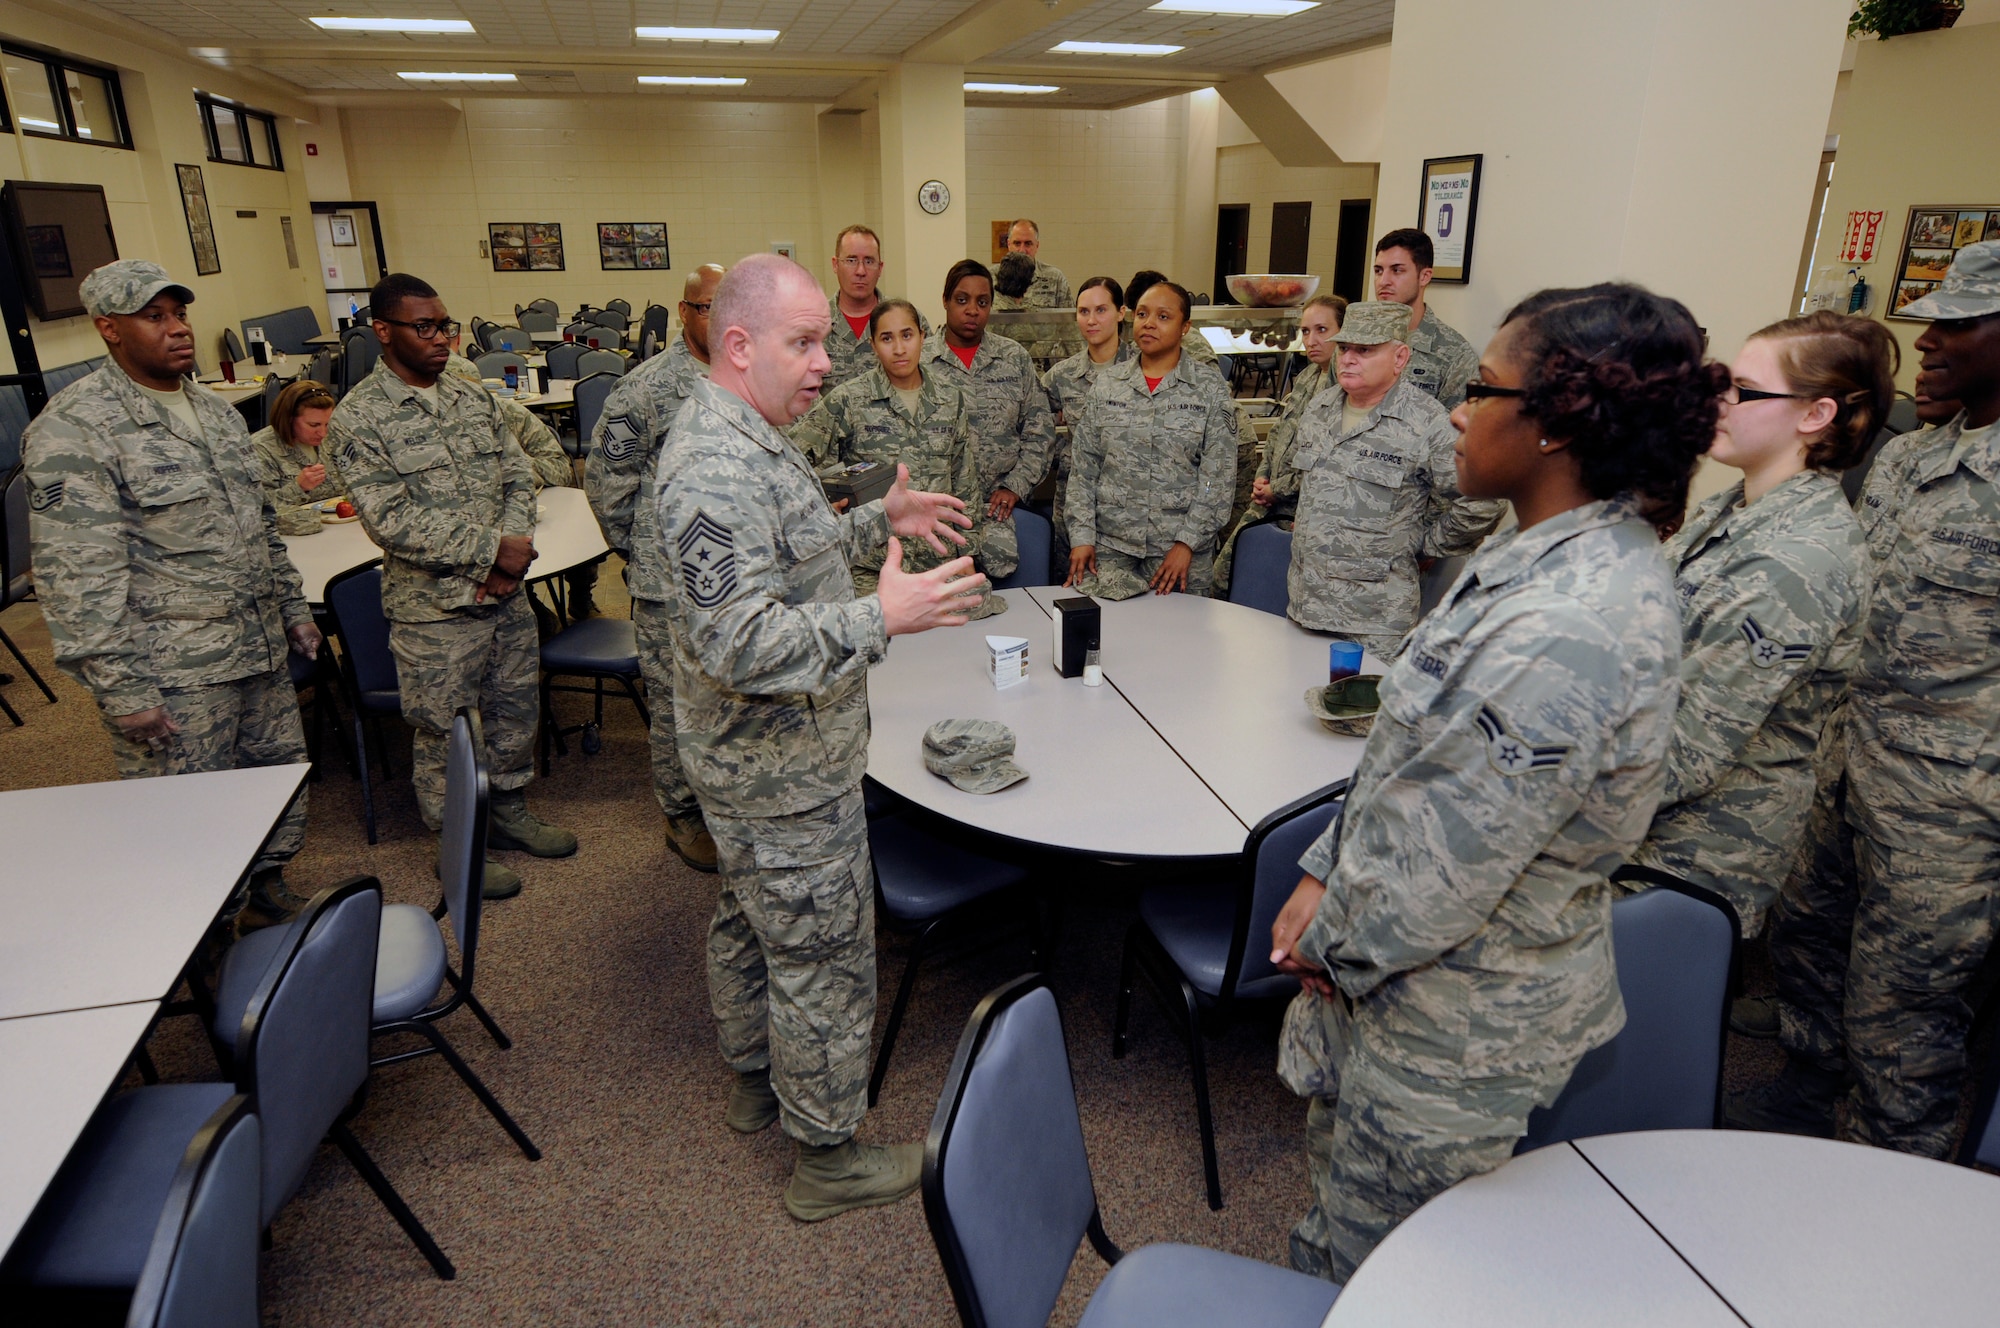 U.S. Air Force Command Chief Master Sergeant of the Air National Guard James W. Hotaling (center) gives a special thanks to members of the 145th Force Support Squadron working in the dining facility, for their hard work and contribution to the mission during his visit to the North Carolina Air National Guard Base, Charlotte Douglas International Airport, March 12, 2016. During the visit, Hotaling discussed his focus of renewing the commitment to the profession of arms, the health of the force, and recognizing the accomplishments of the 145th Airlift Wing. Hotaling also lead an all enlisted call to provide Airmen with an opportunity to ask questions about their concerns. (U.S. Air National Guard photo by Staff Sgt. Julianne M. Showalter/ Released)